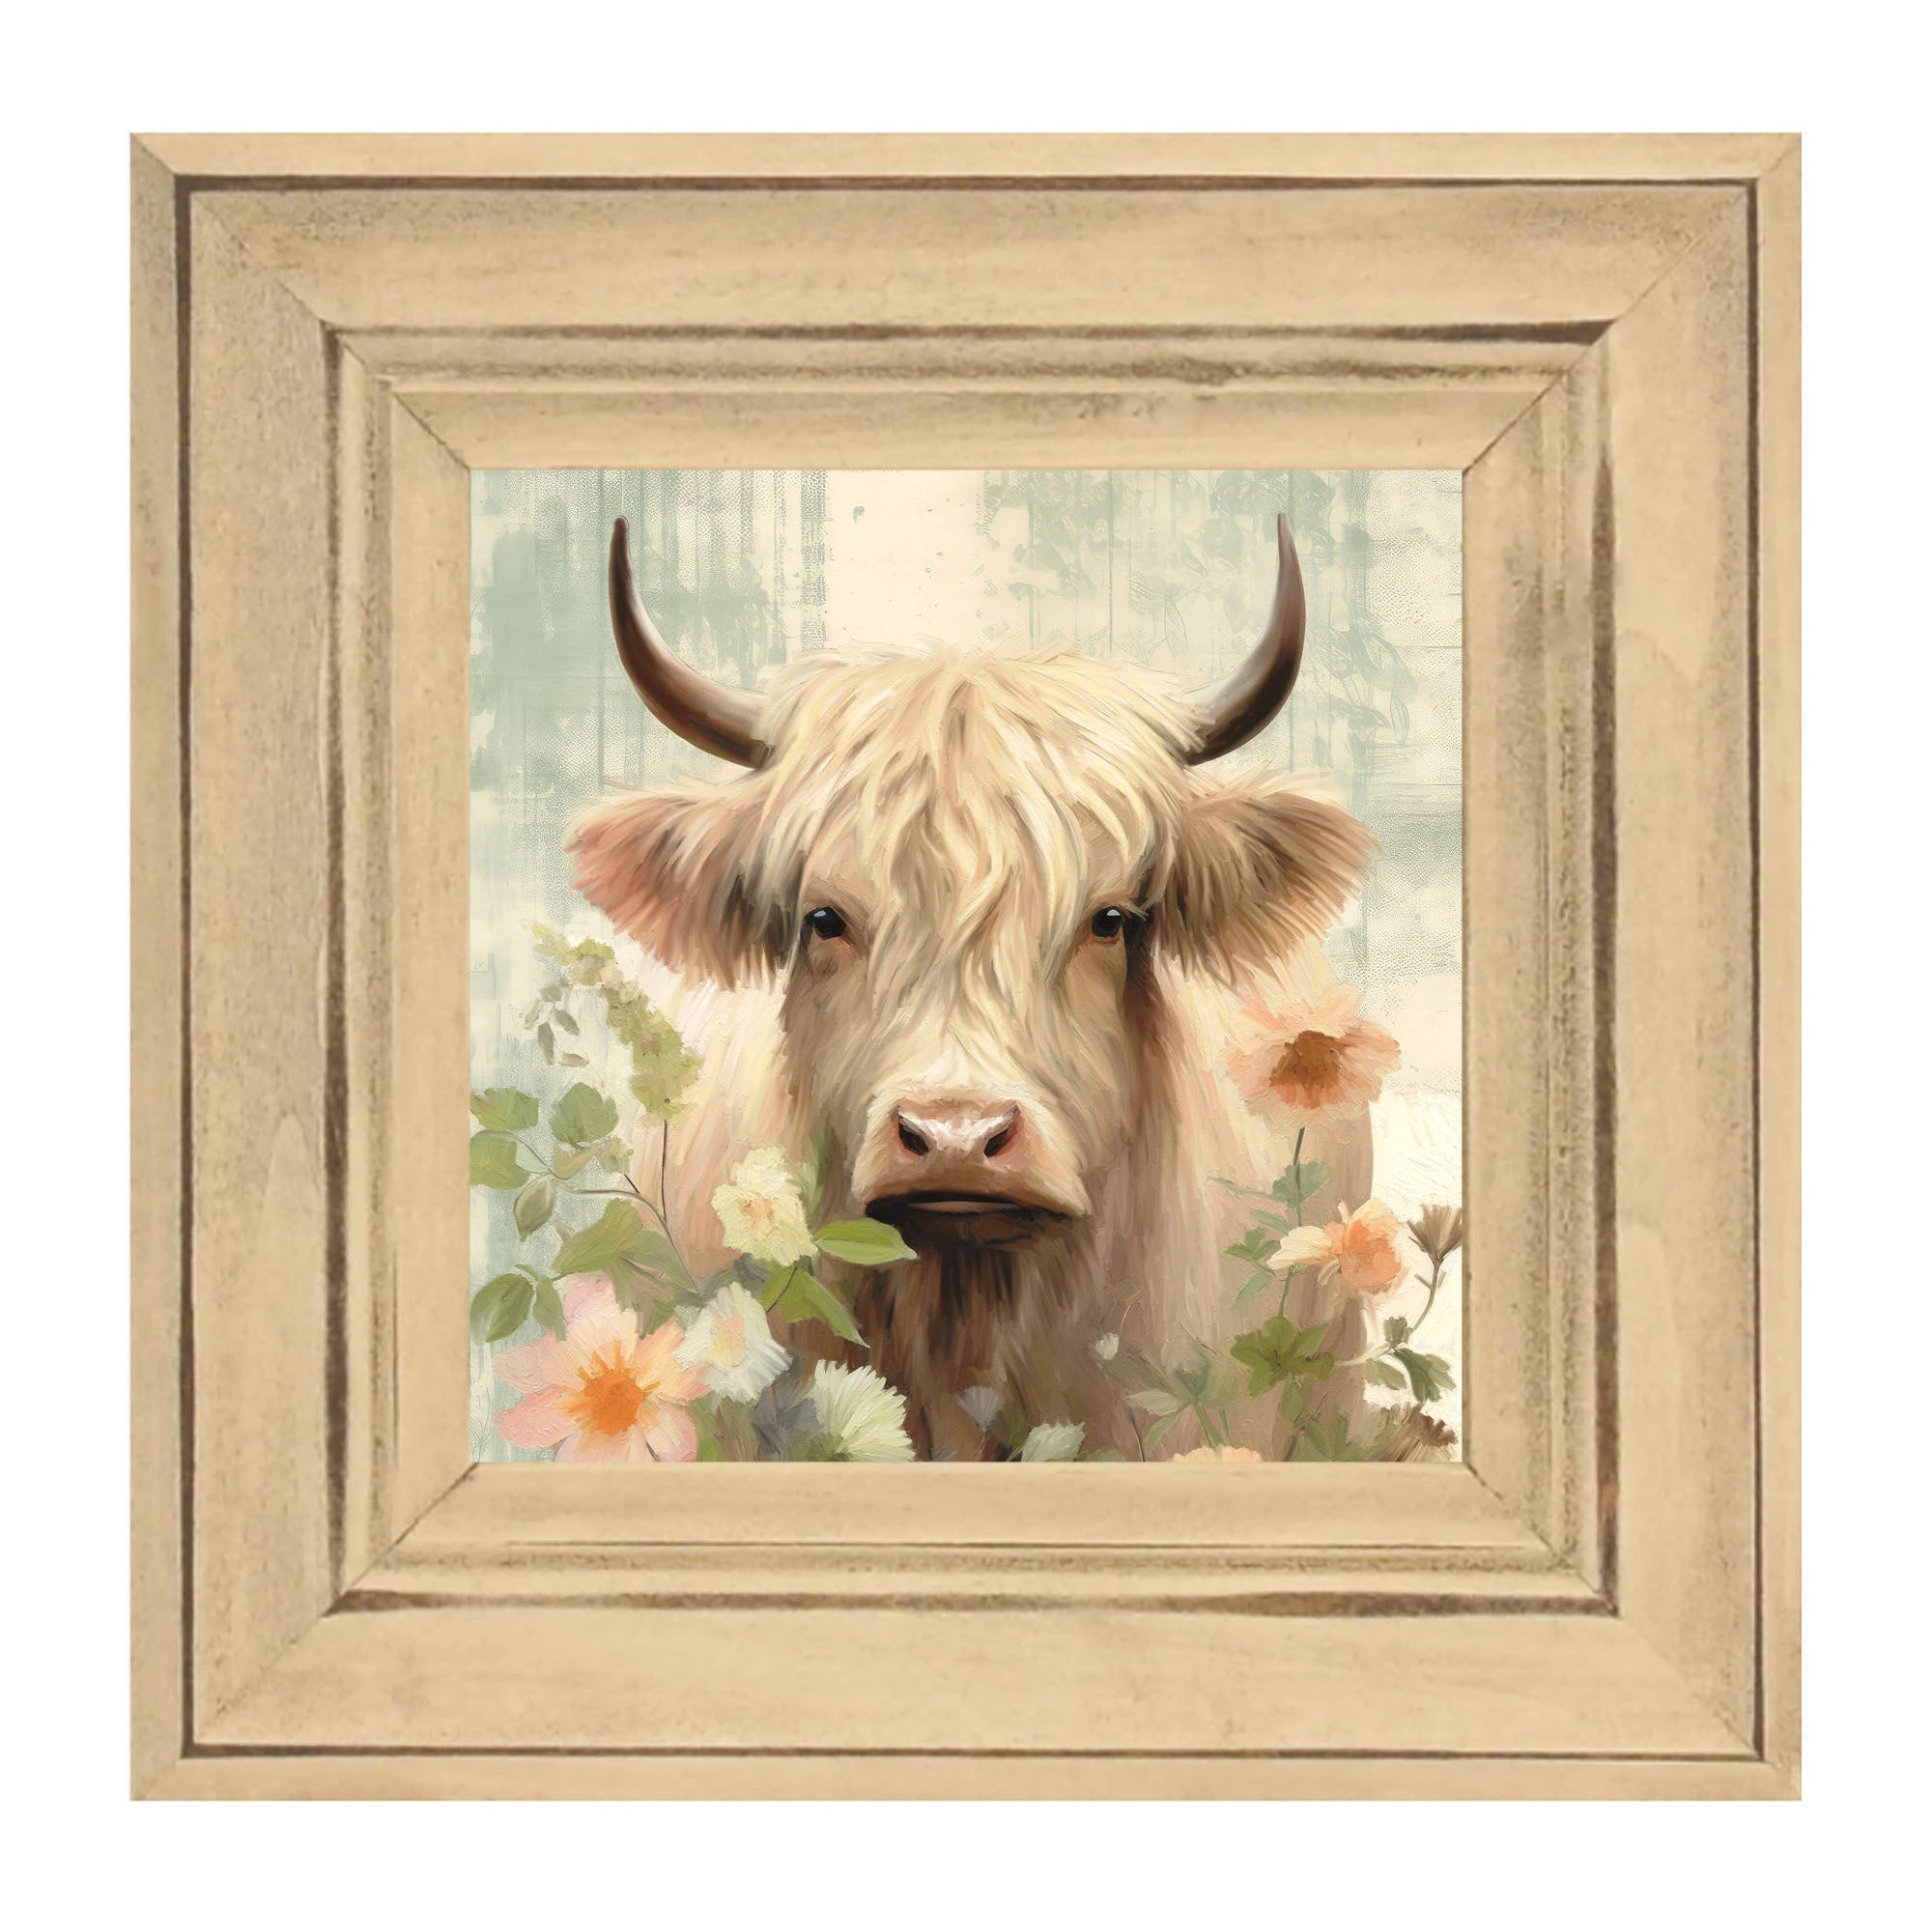 White Highland cow with flowers